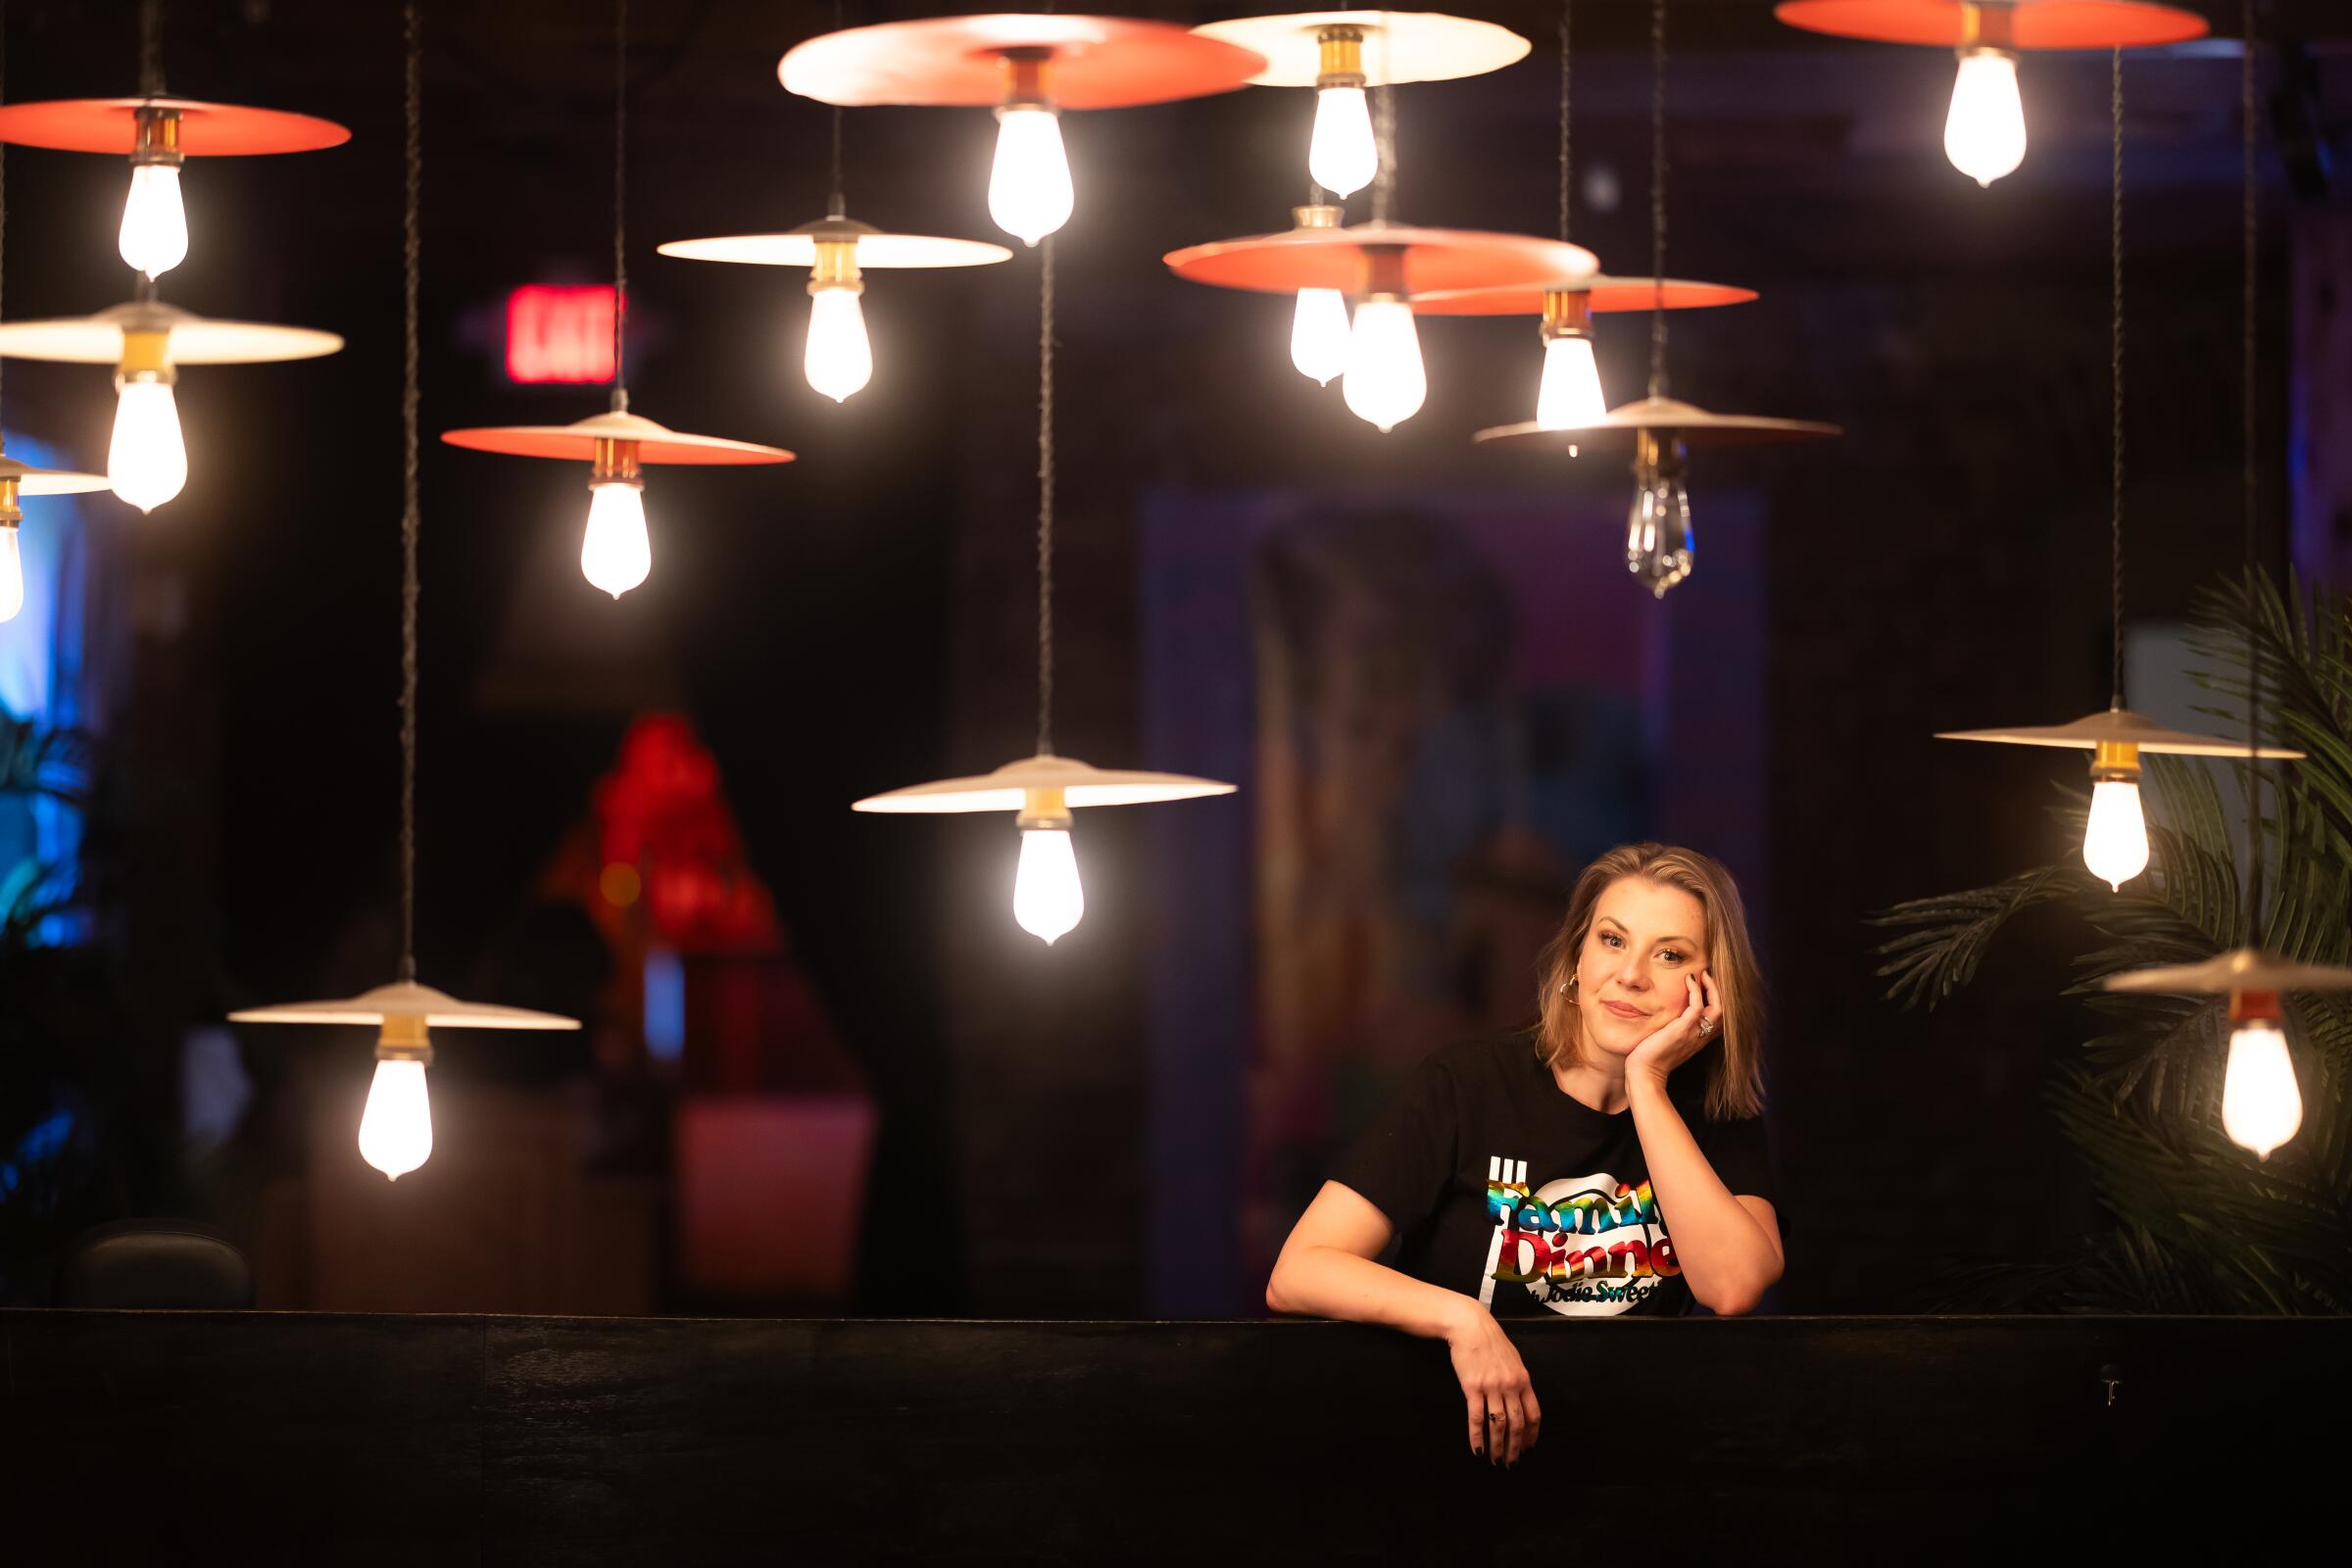 A woman poses amid low hanging light fixtures.